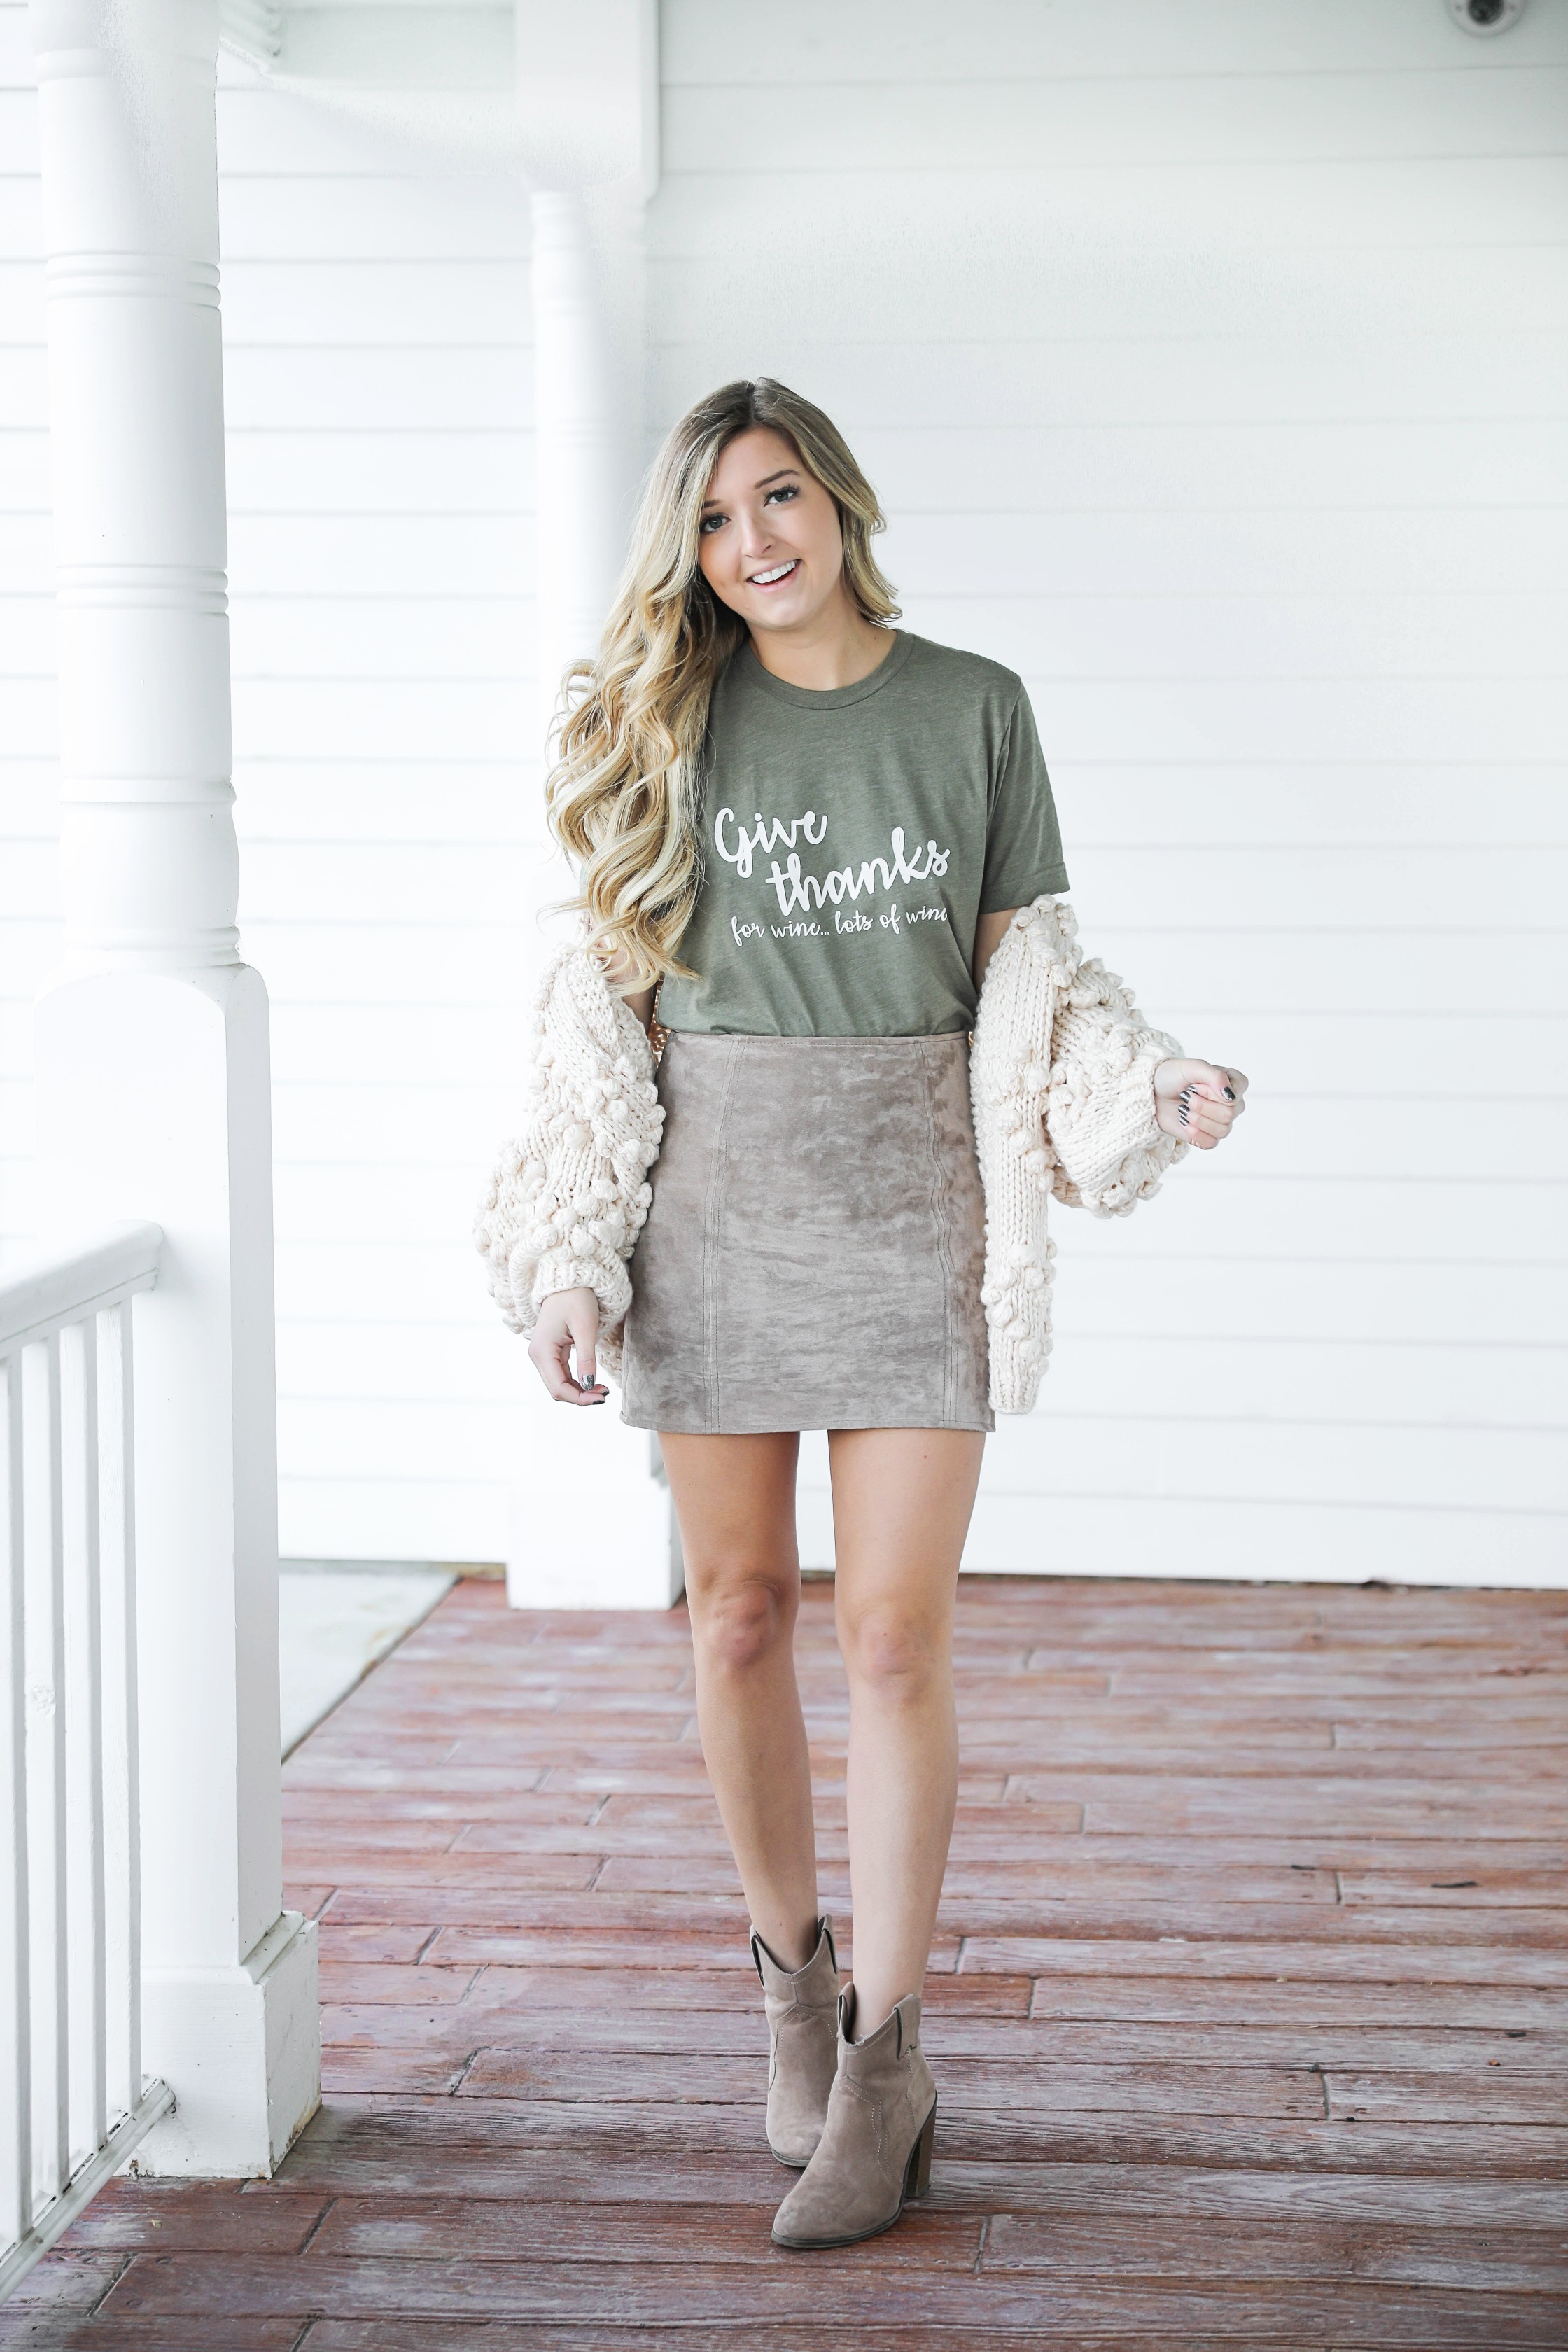 Thanksgiving outfit idea! Thanksgiving look, I love this t-shirt that says thankful for wine! The olive color shirt is so cute for this time of year and looks so good with the suede skirt and pom cardigan! Details on fashion blog daily dose of charm by lauren lindmark